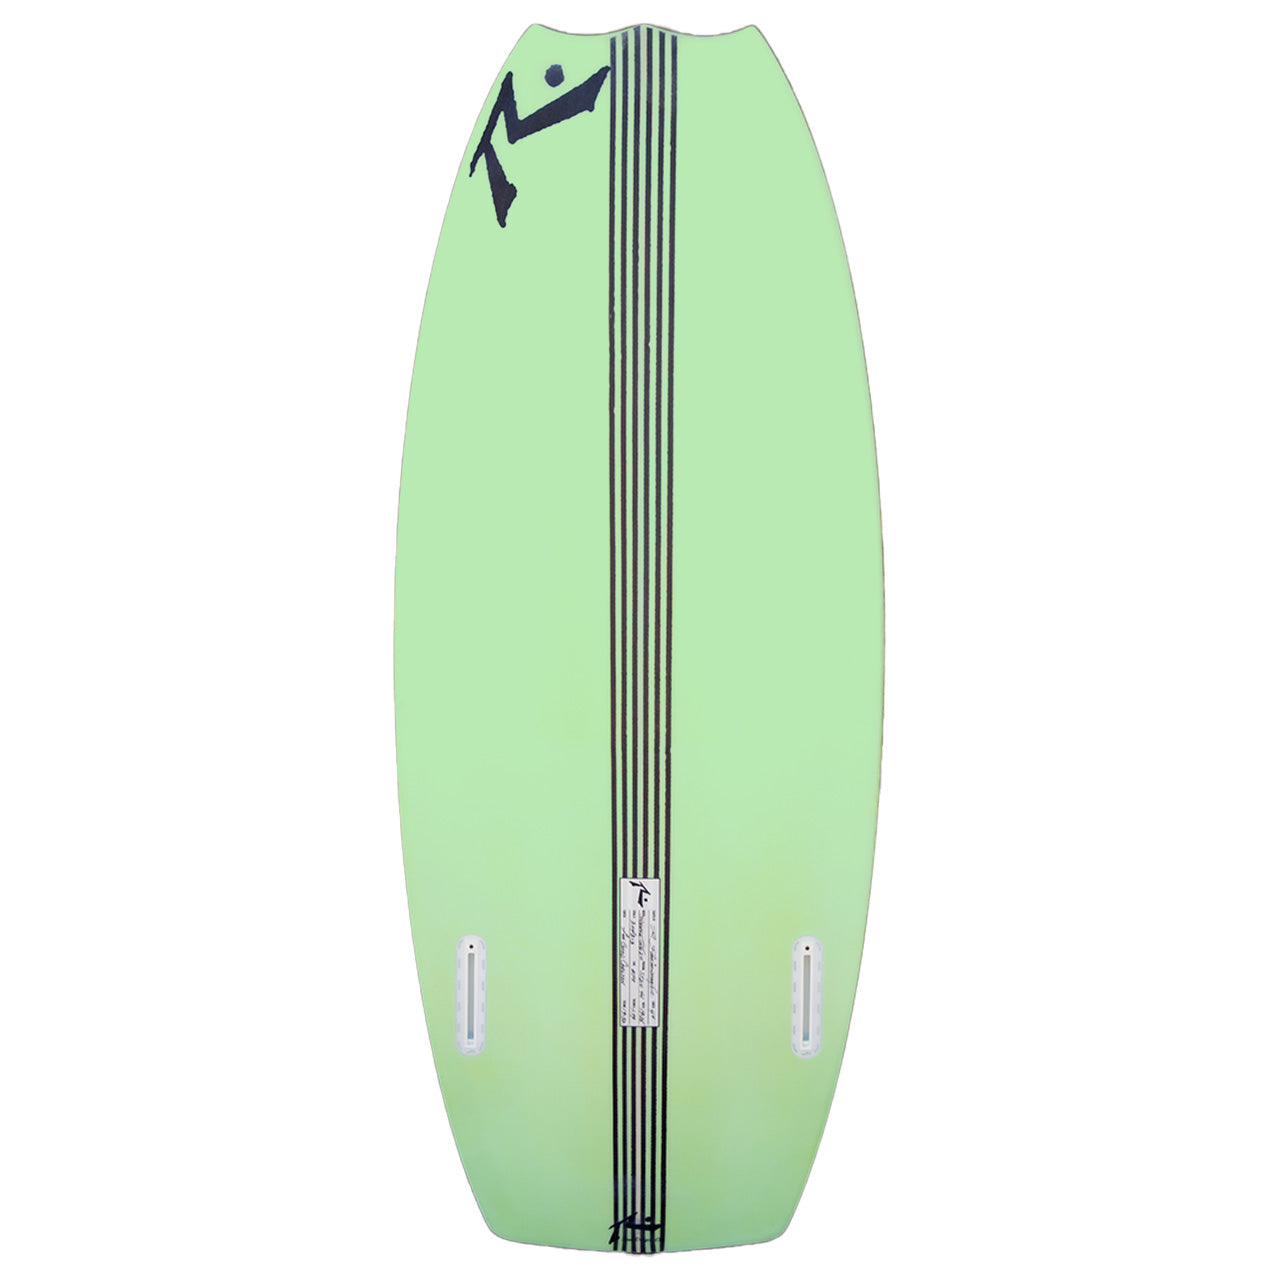 Snaggle Tooth 2.0 Wakesurf Board - Rusty Surfboards - Deck View - Green